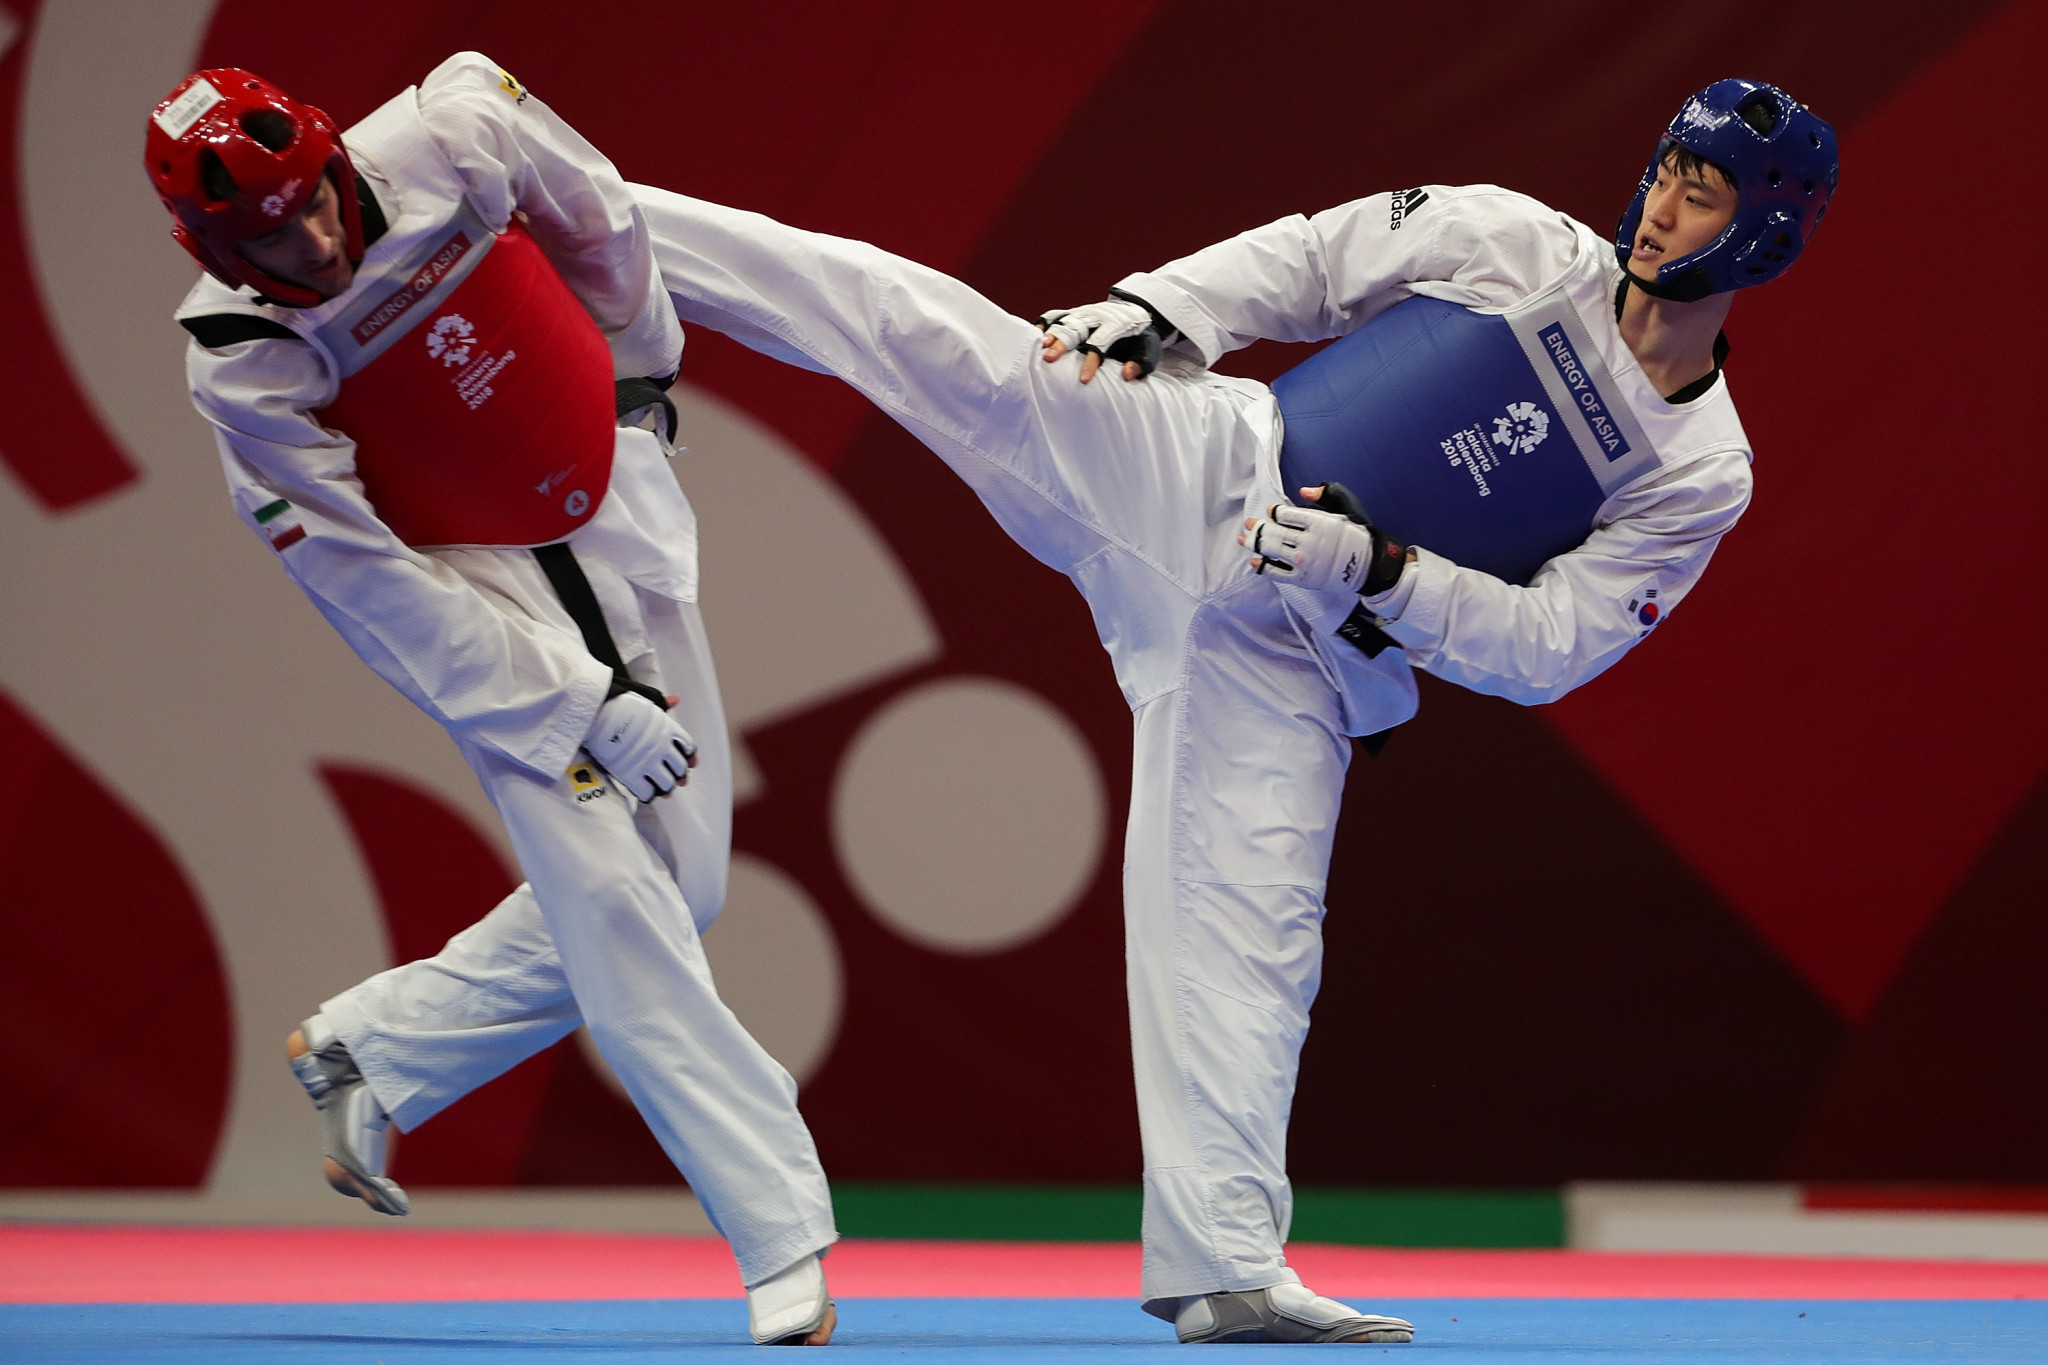 World champion Lee Dae Hoon was one of three winners on the opening day of the World Taekwondo Grand Prix in Taoyuan in Chinese Taipei ©Getty Images